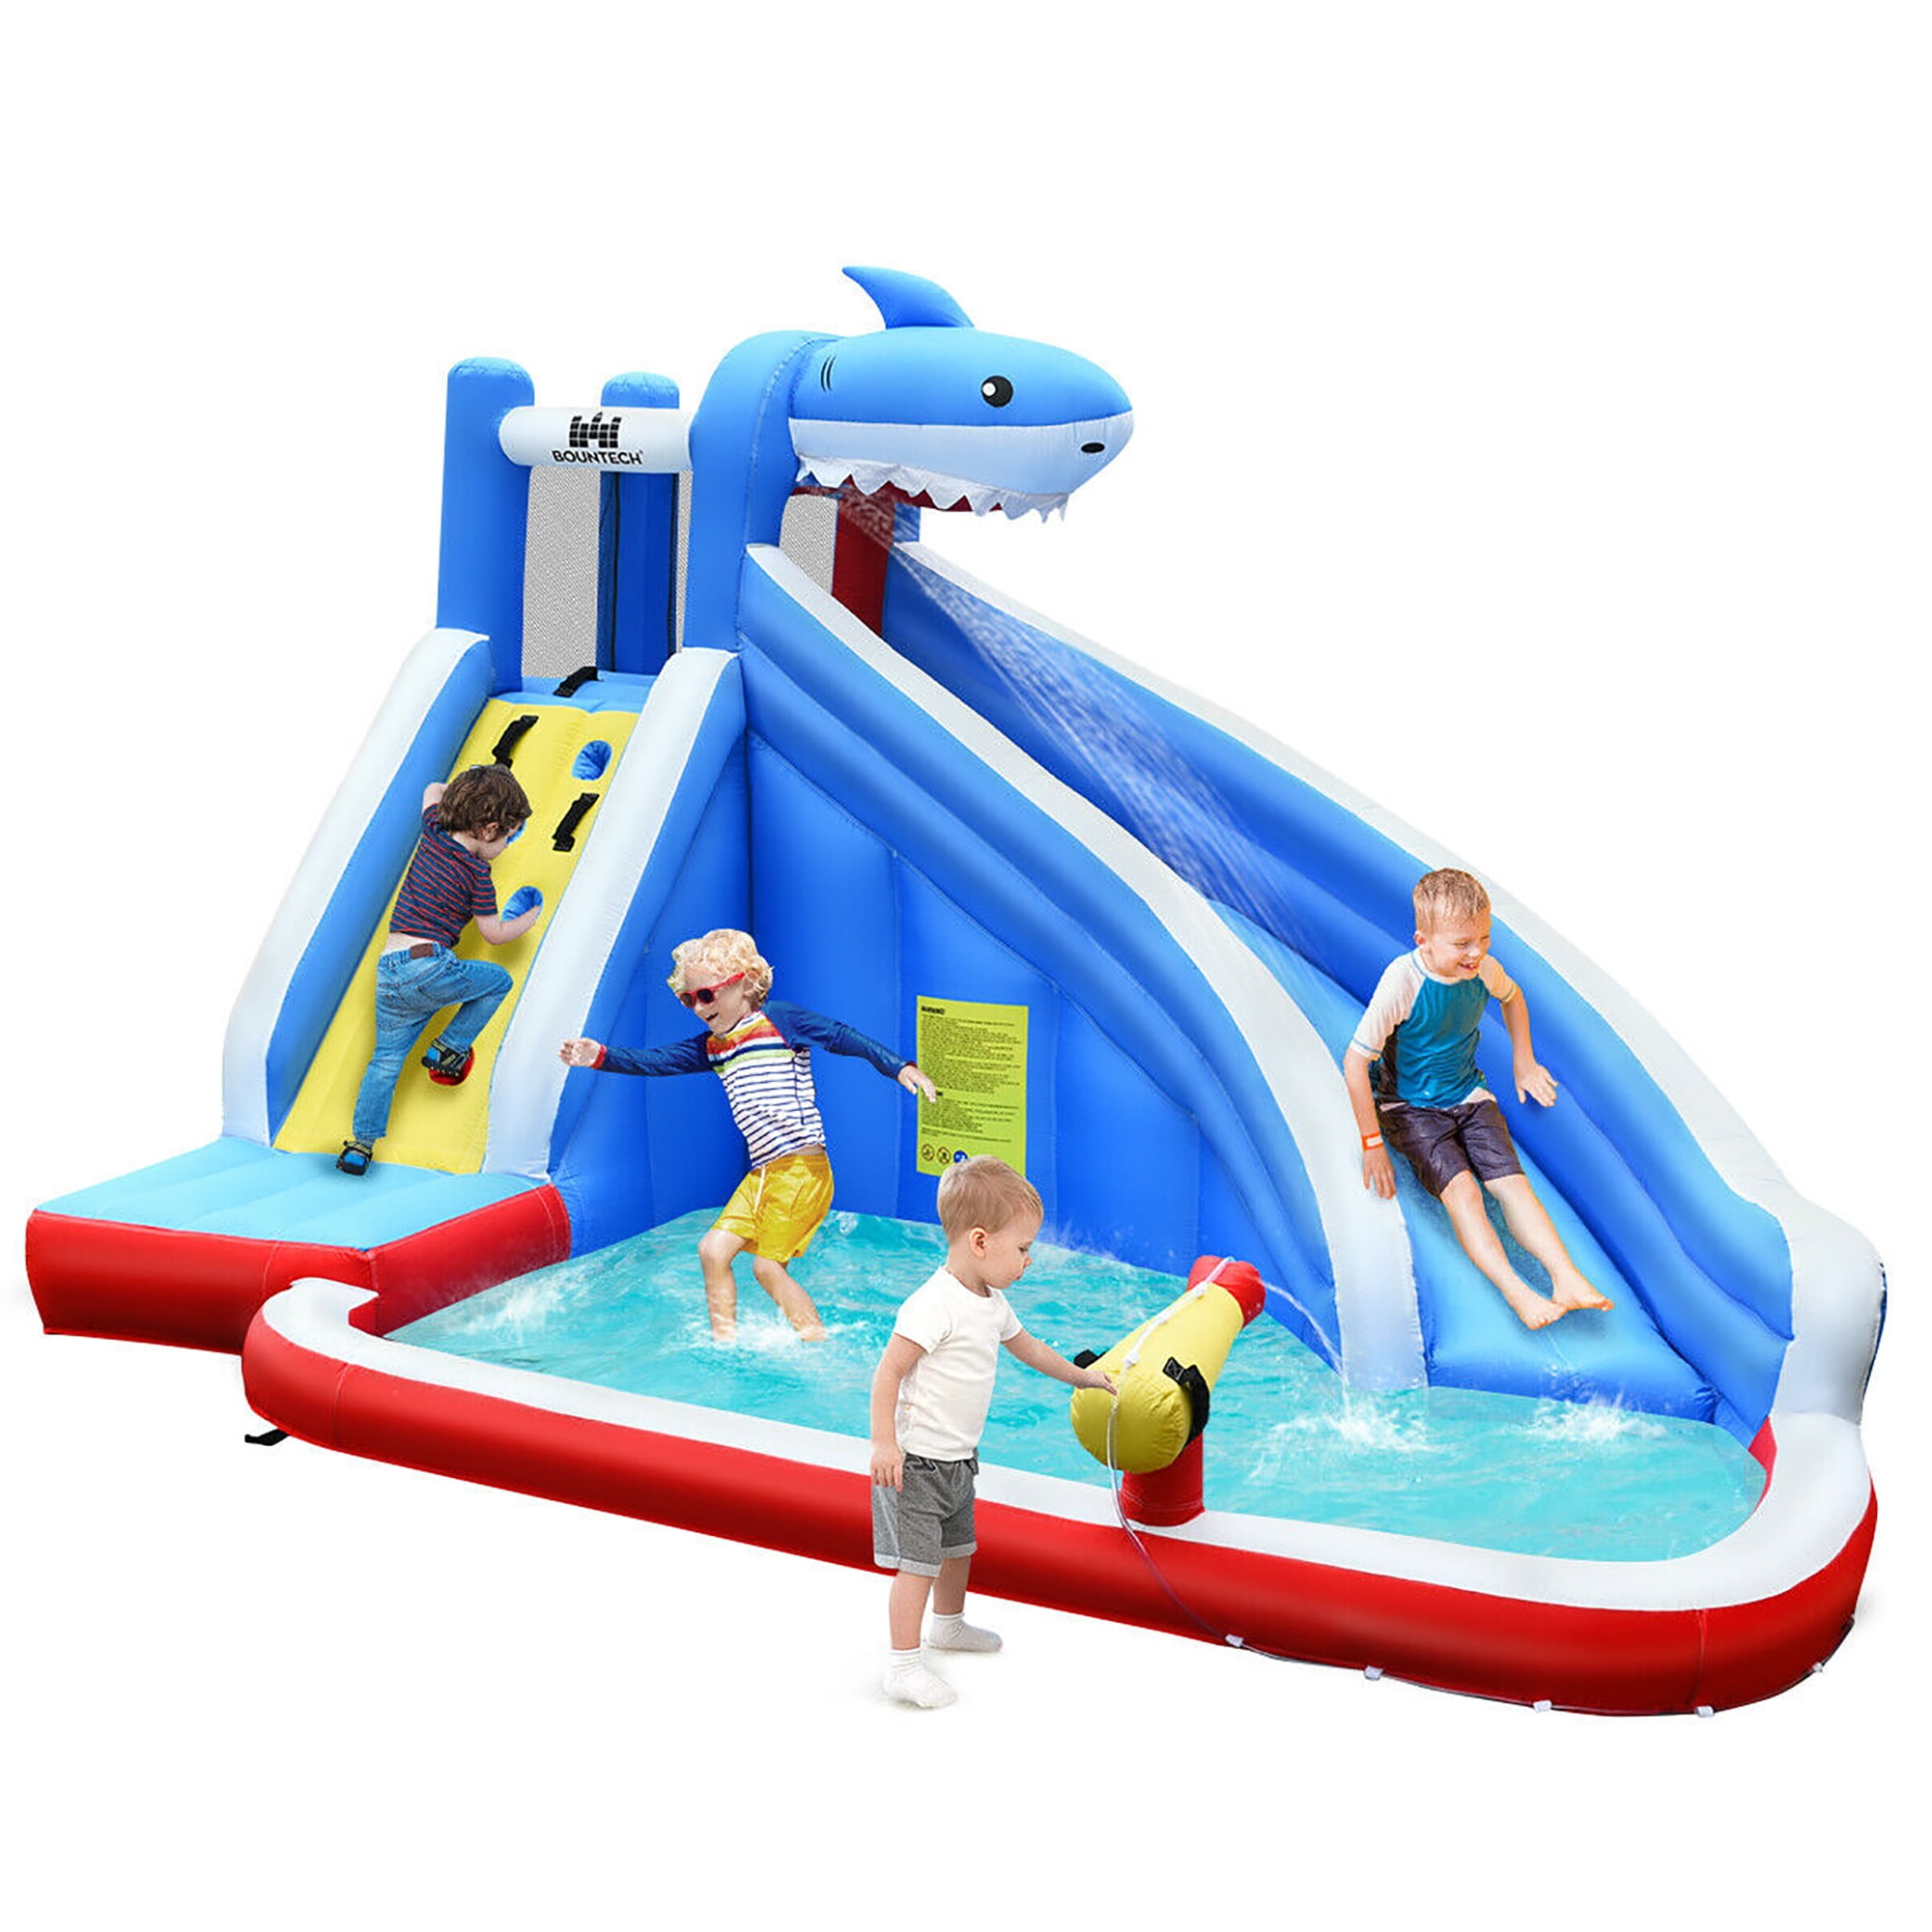 Rivetino Water Slide Child Lawn Water Slides Double Water Slide Outdoor Supplies PVC Inflatable Water Toy 